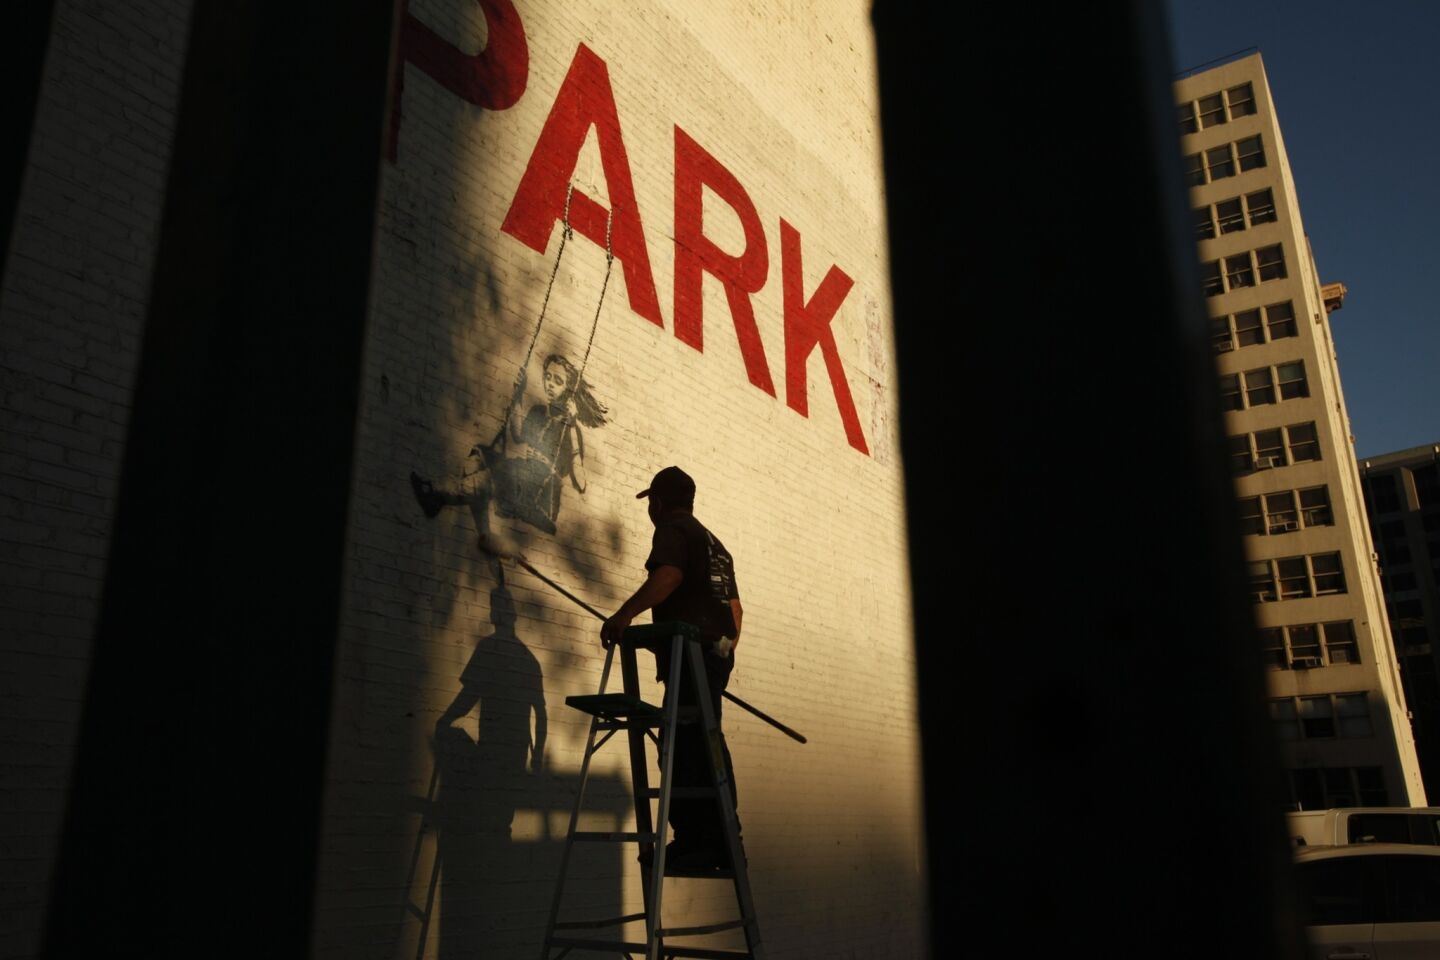 In this downtown Los Angeles mural, a young girl swings from the word "PARK," formerly written as "PARKING." Just down the block from this area, a downtown resident group is looking to find a little more than $6 million to transform a parking lot into a community park with a playground.